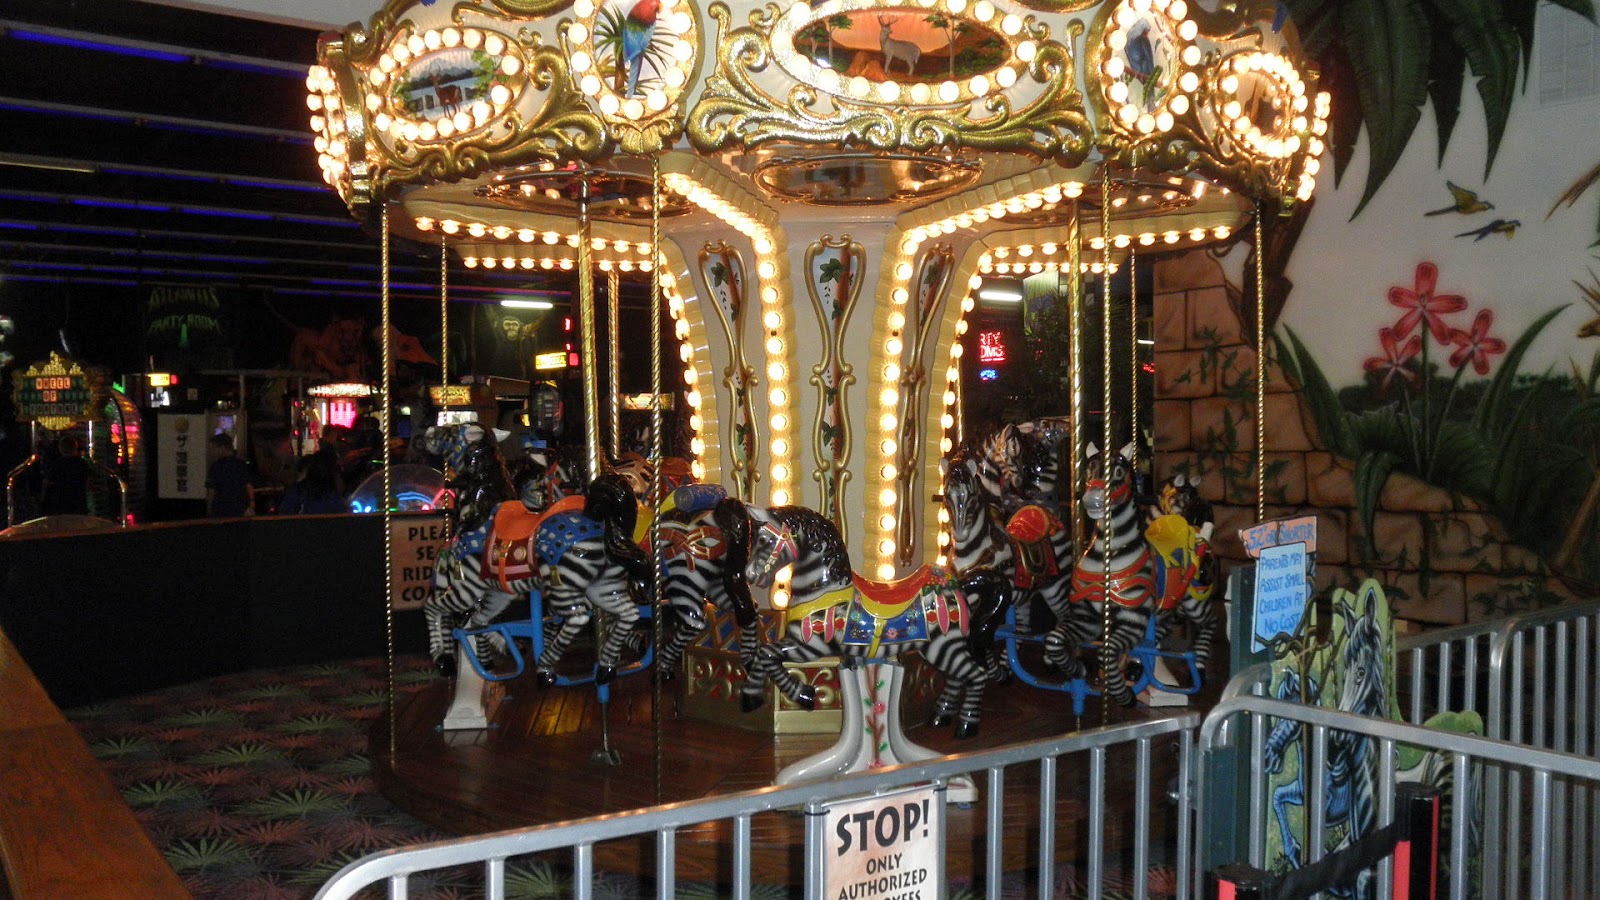 Merry go round with horses for children